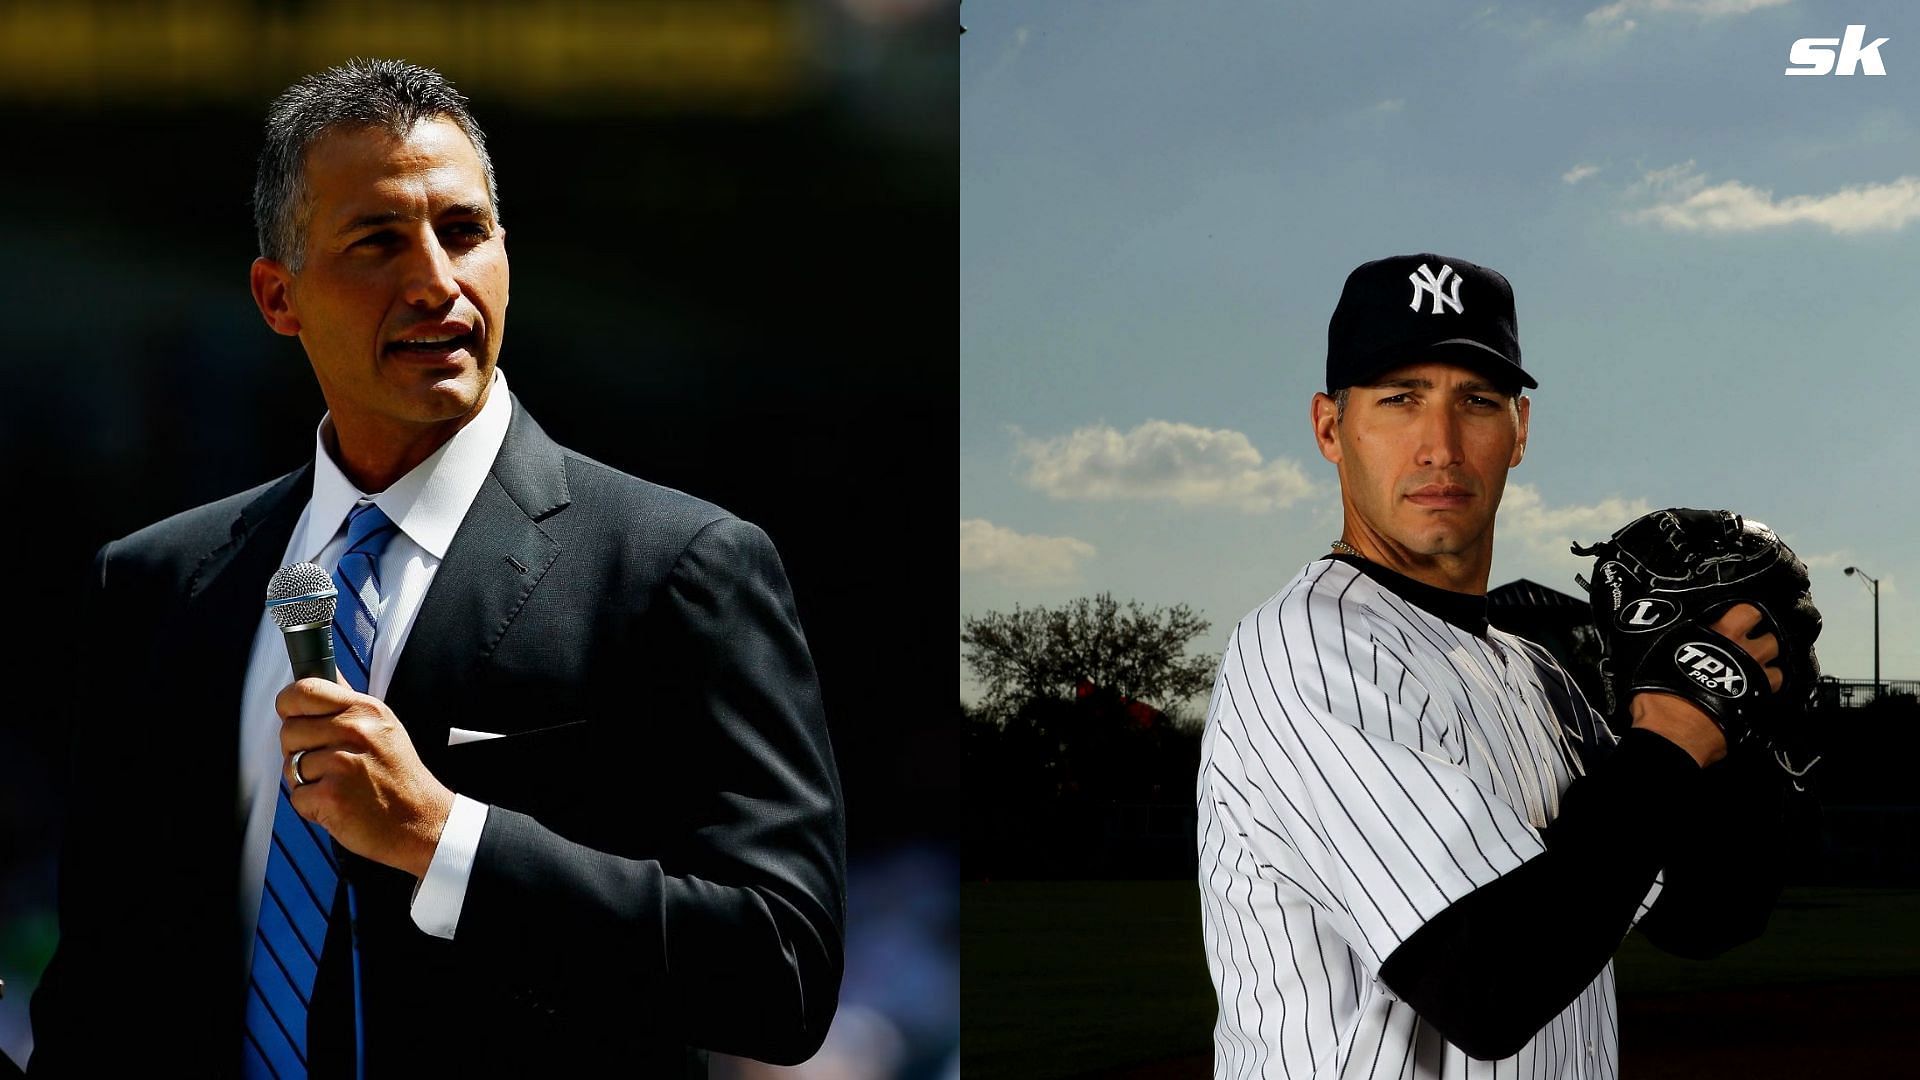 Andy Pettitte: Andy Pettitte's 2007 take on PED use: I tried HGH. Though  it was not against baseball rules, I was not comfortable with what I was  doing